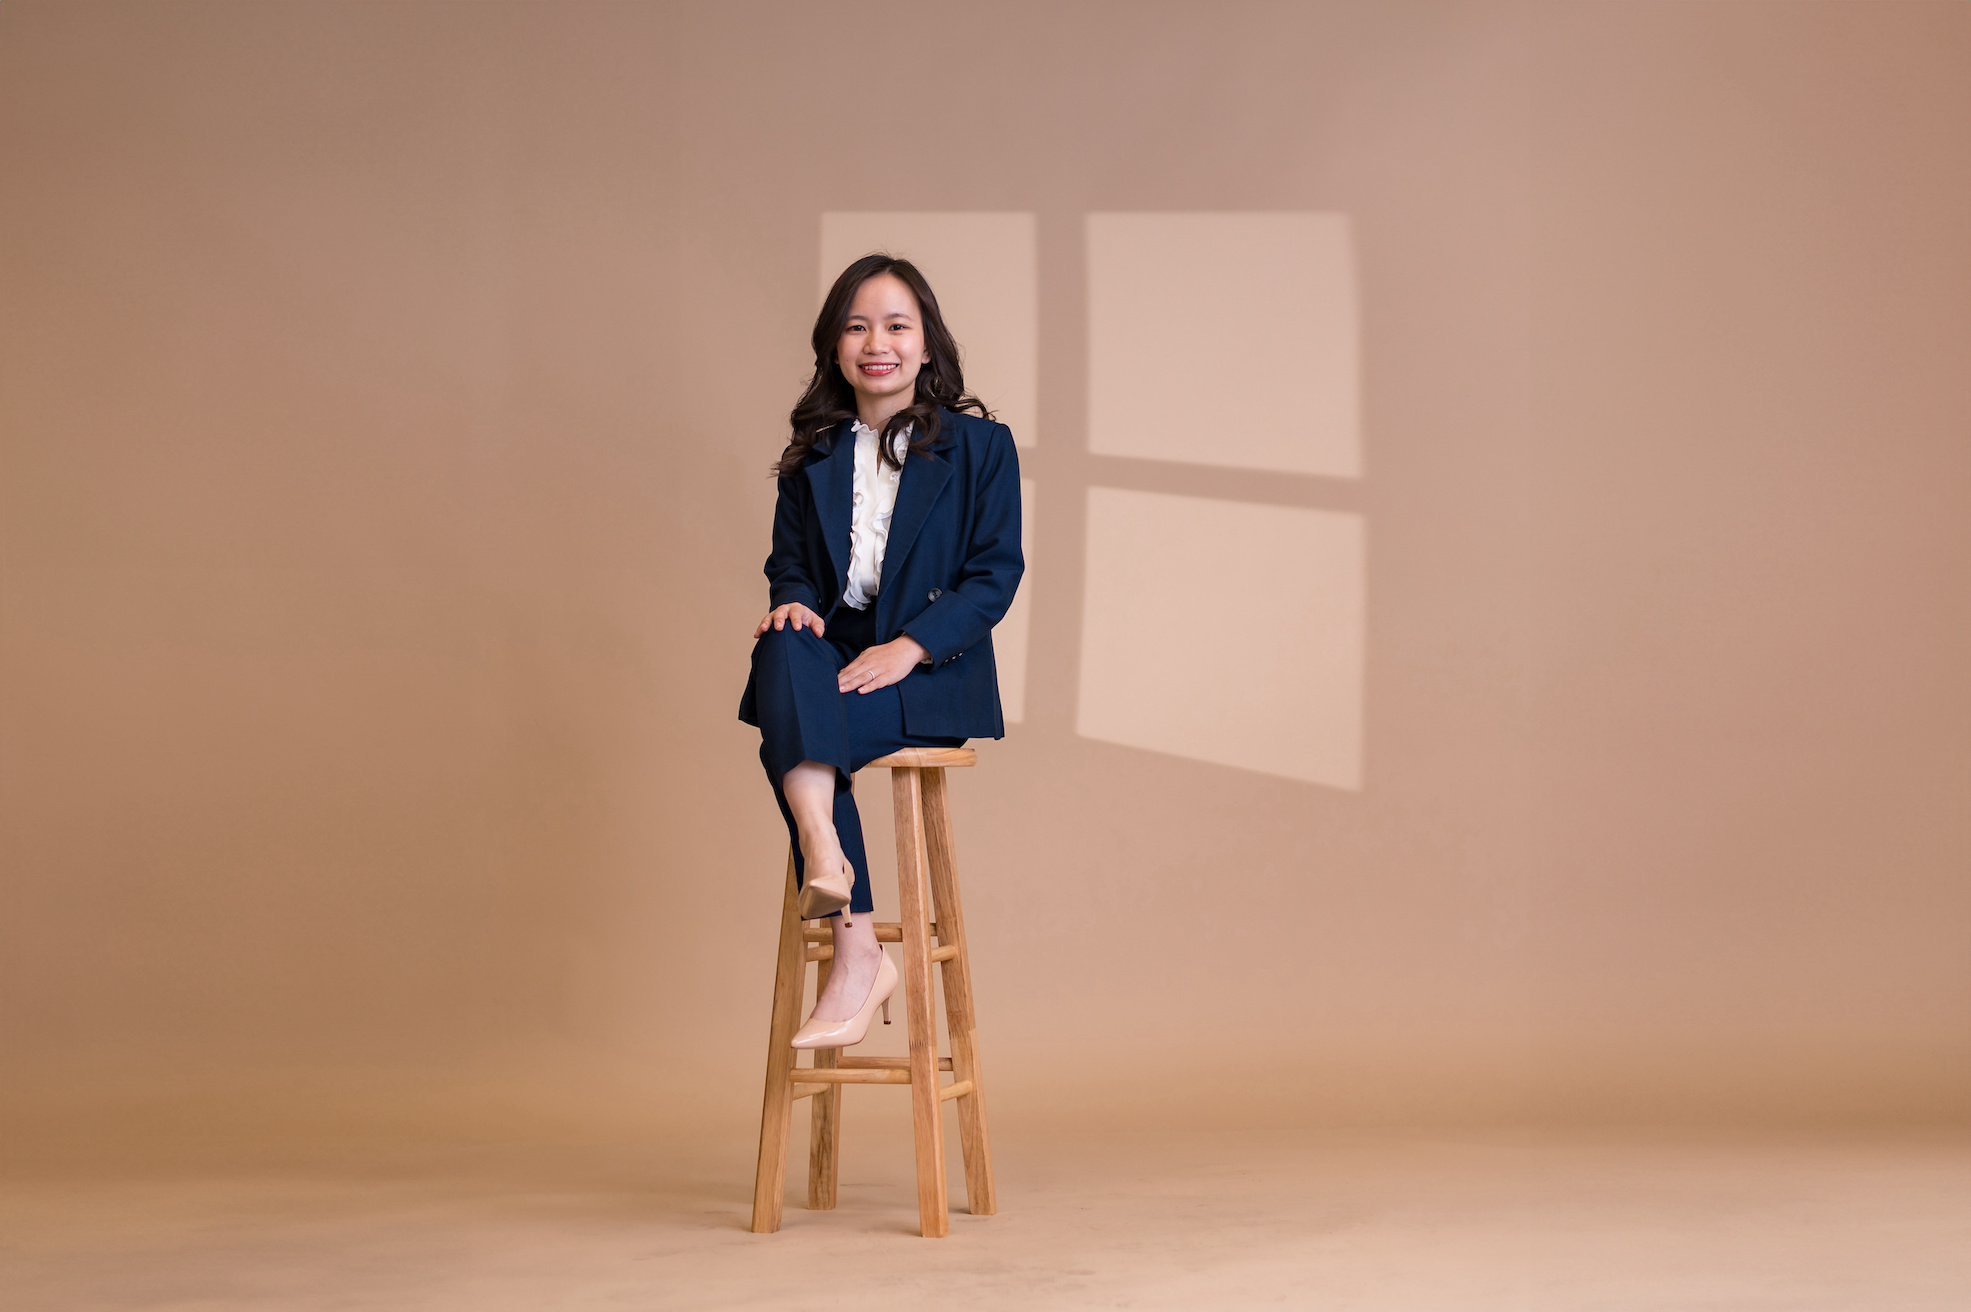 Emma Pham poses on a stool in a blue business suit.